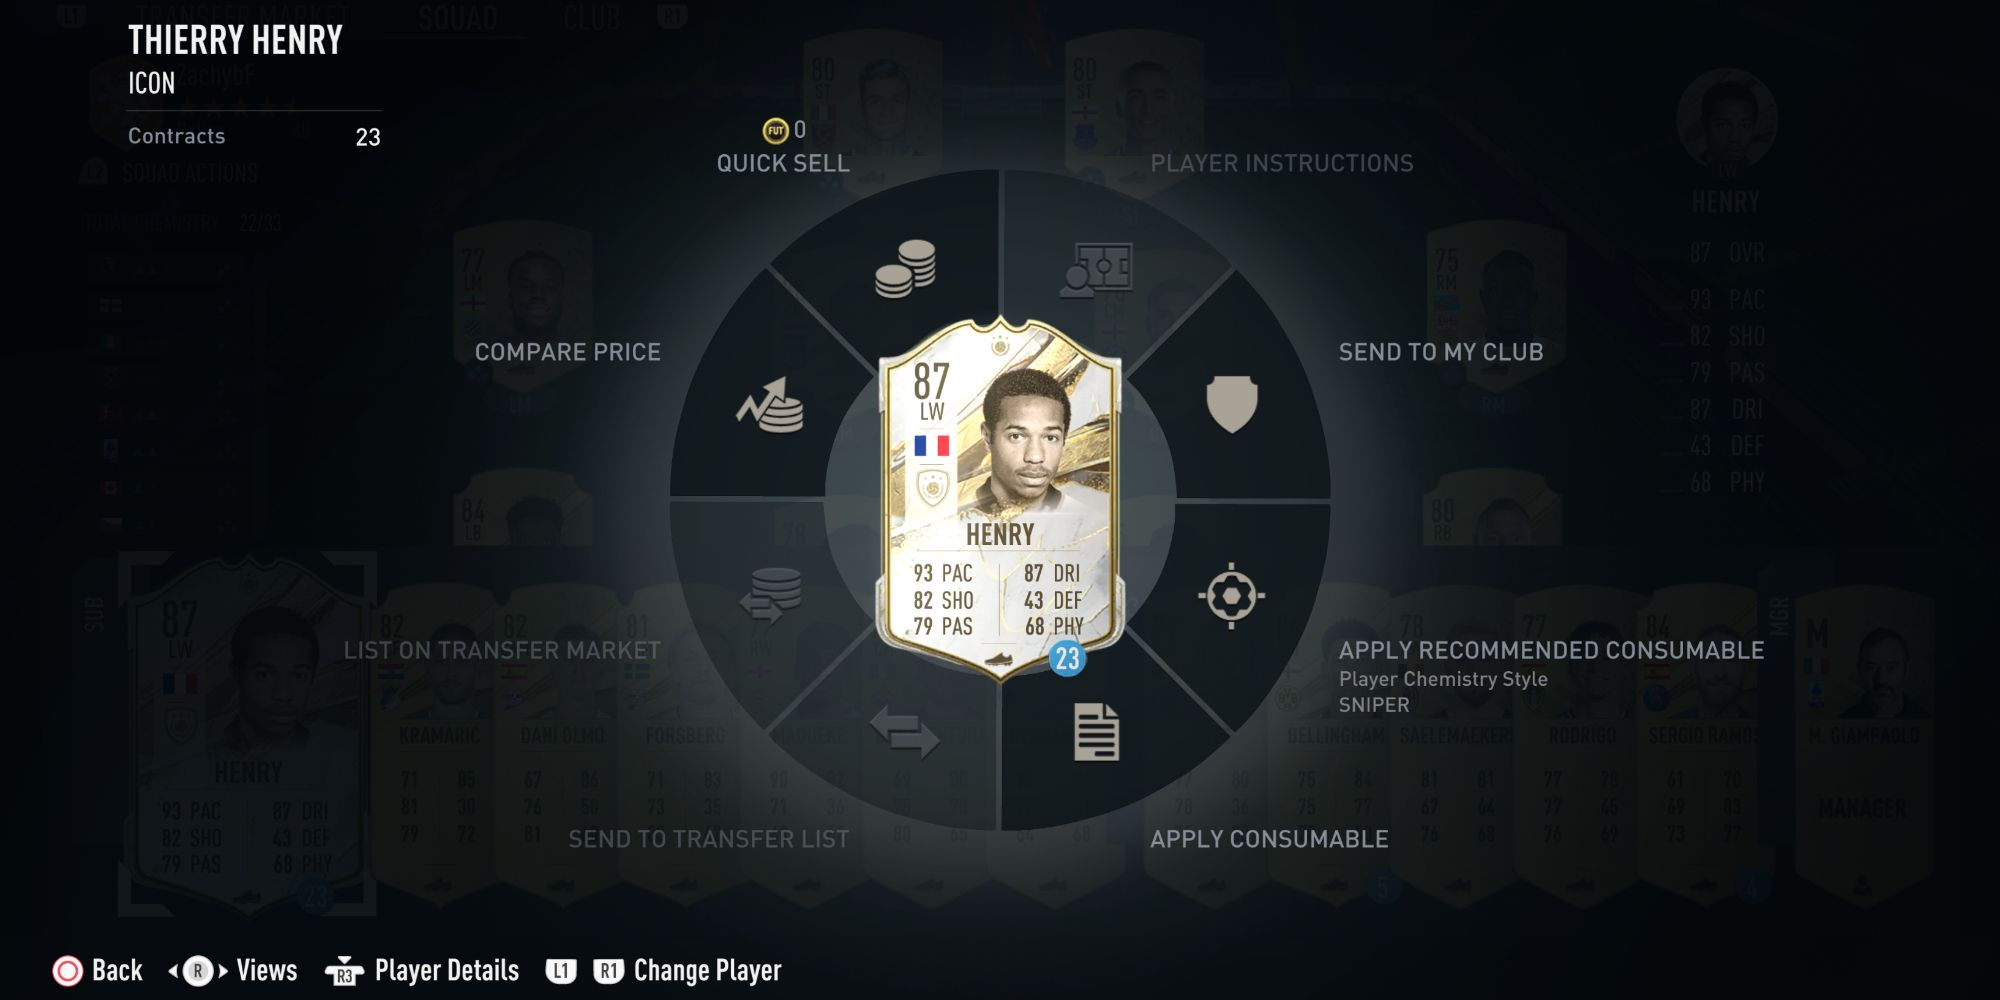 A loan version of Thierry Henry in the FUT team menu for FIFA 23.